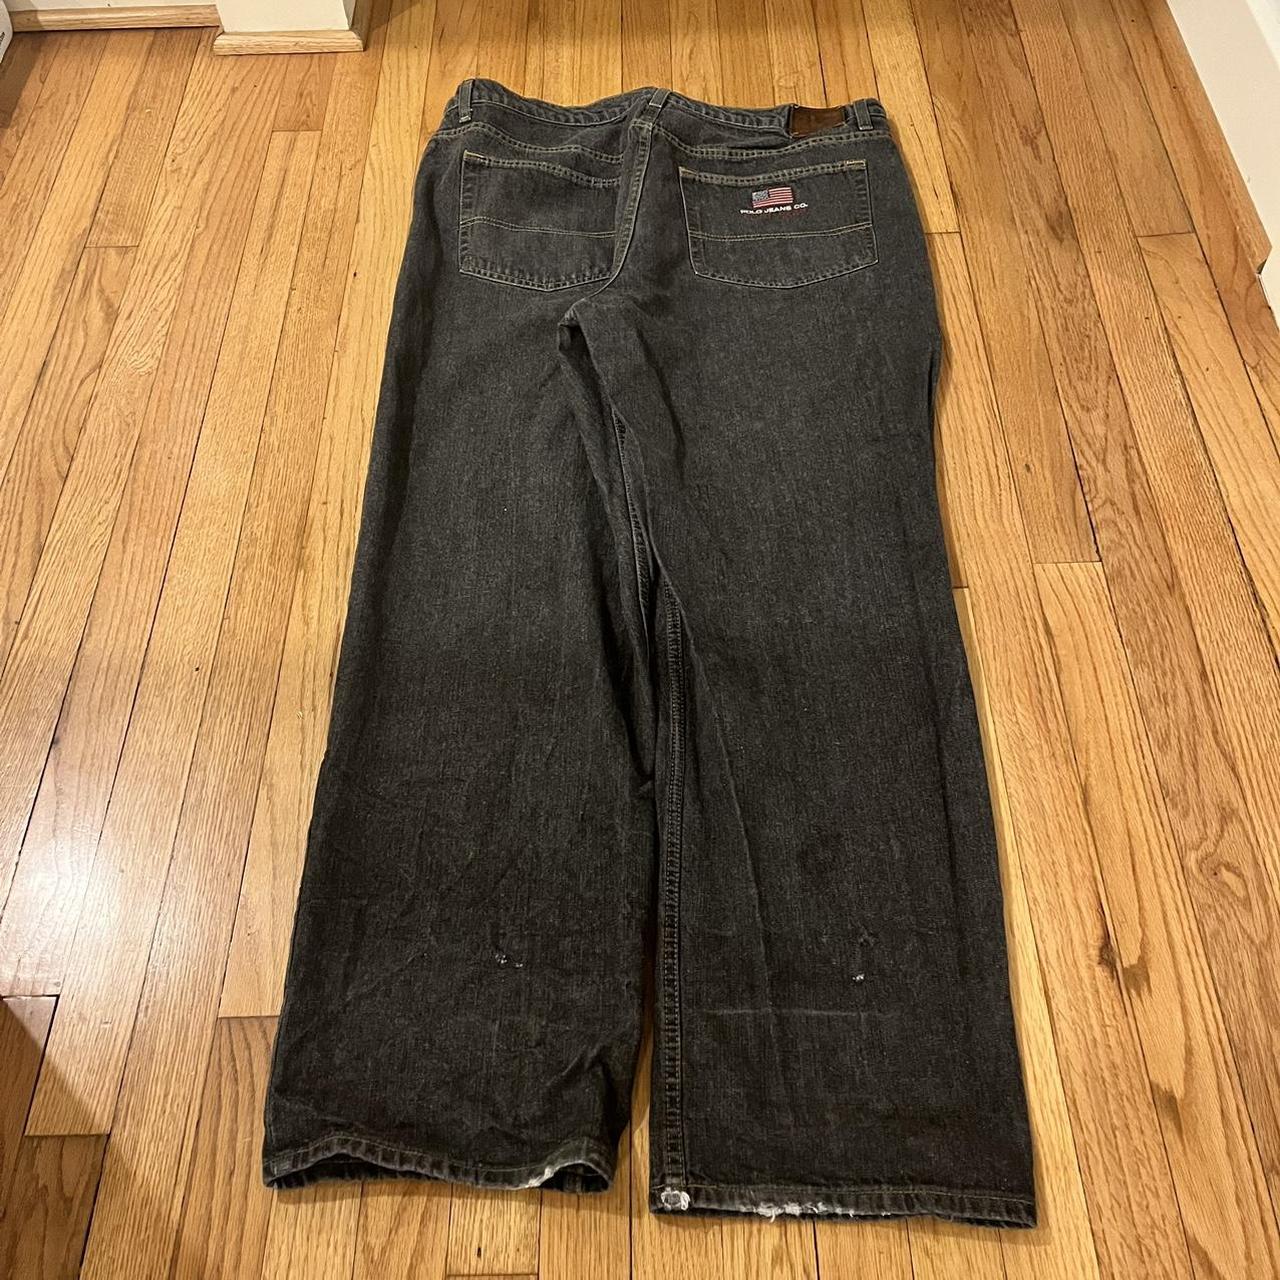 polo jeans #baggy #skater #jnco #southpole - Depop